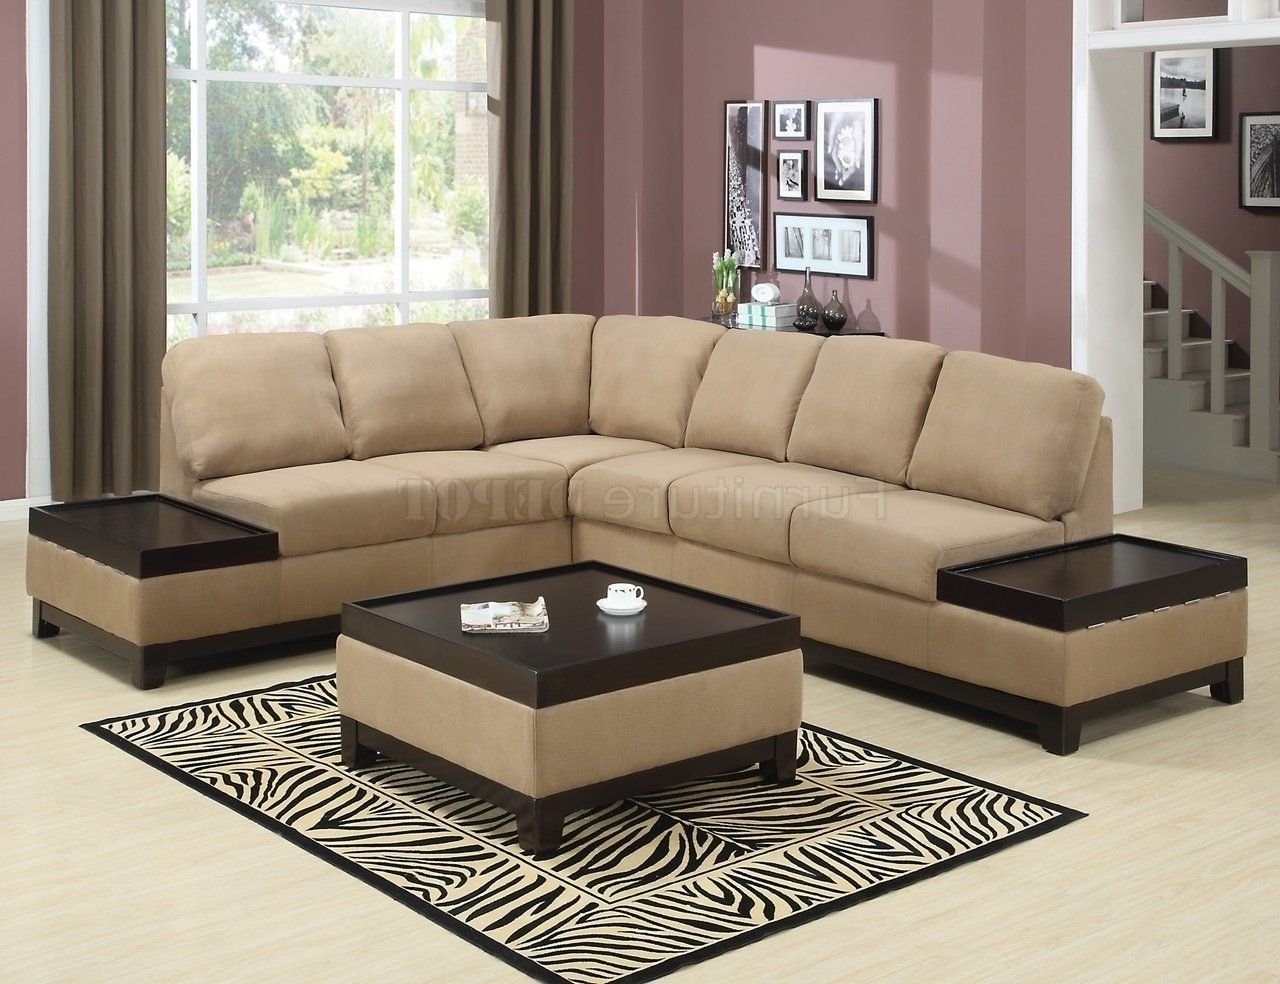 Sectional Sofas Tulsa | Book Of Stefanie With Tulsa Sectional Sofas (Photo 7 of 10)